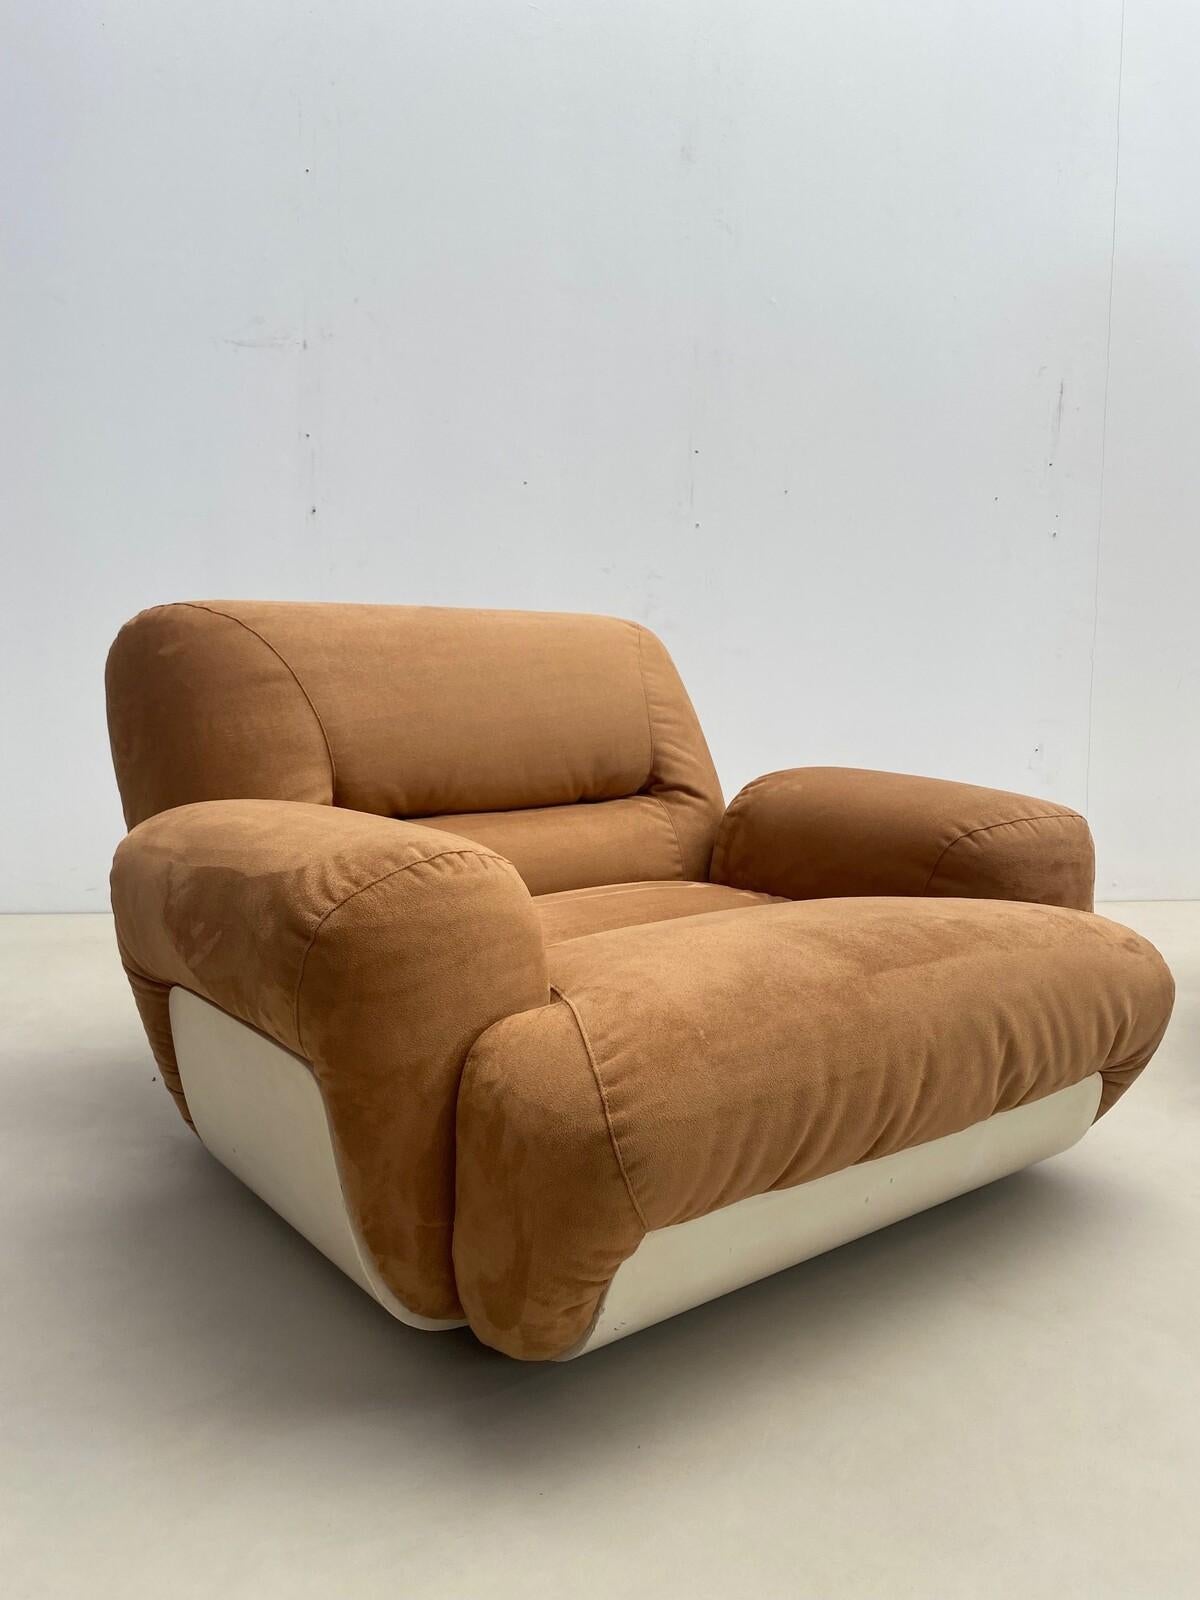 Italian Pair of Mid-Century Modern Nubuck Leather Lounge Chairs, Italy, 1970s For Sale